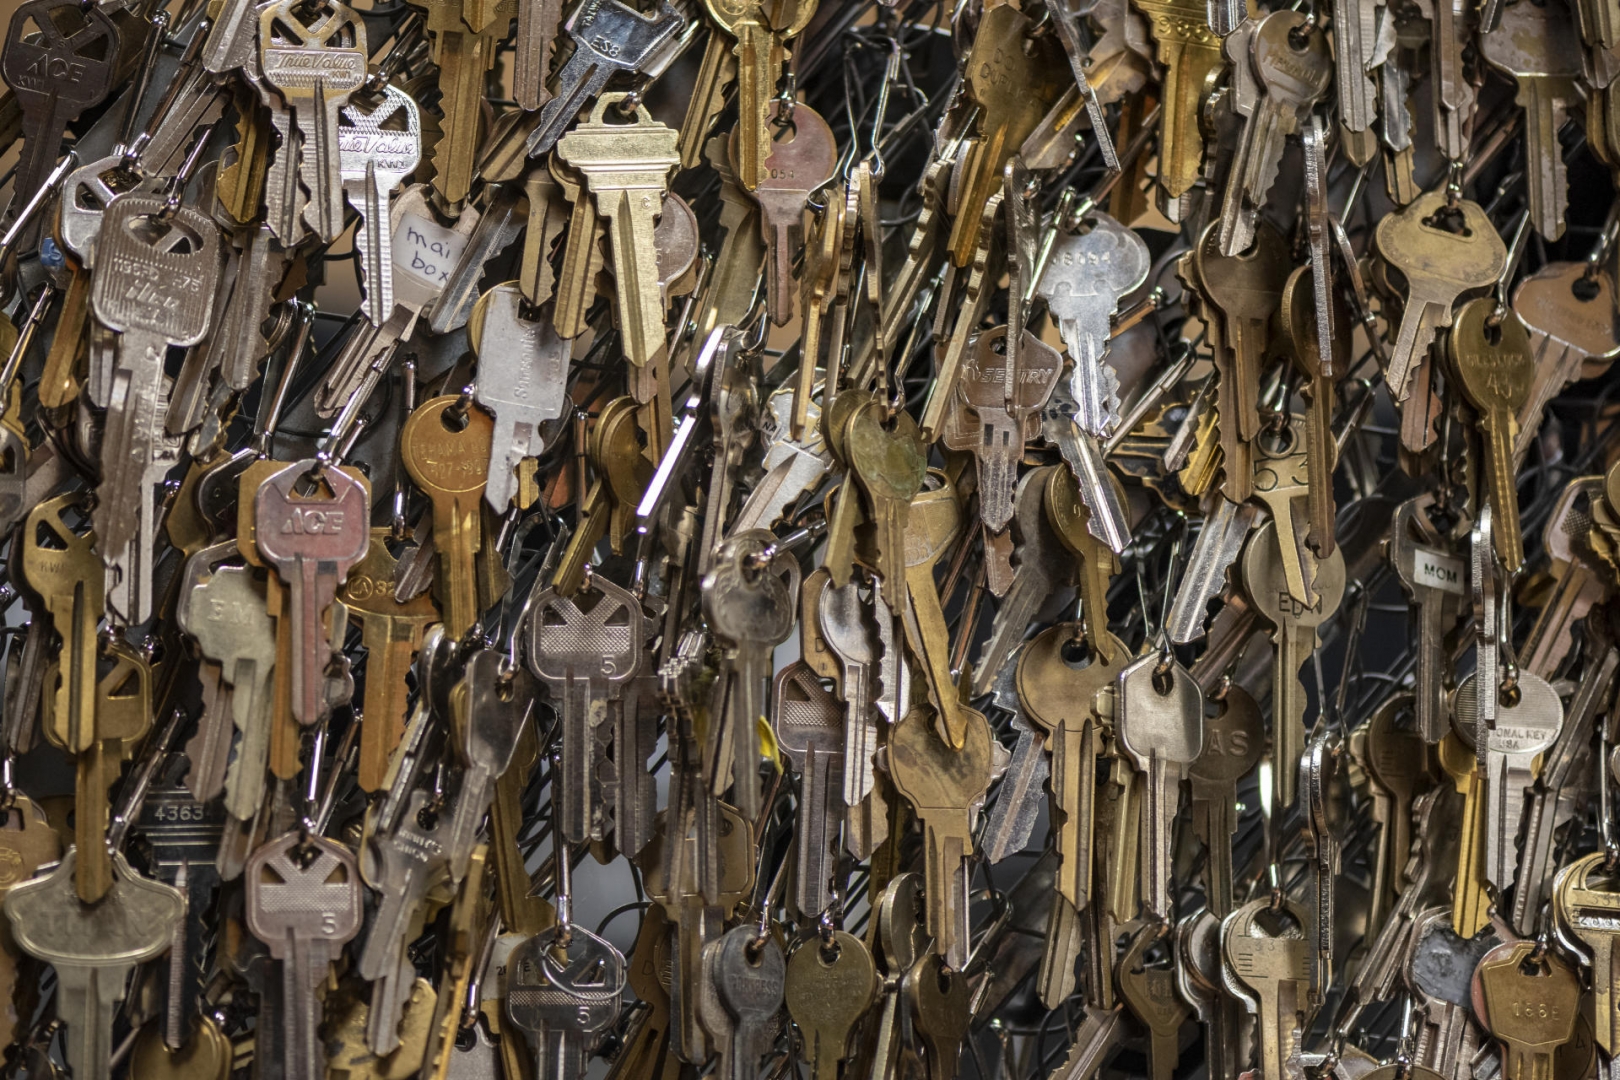 Hundreds of keys hang with clips.